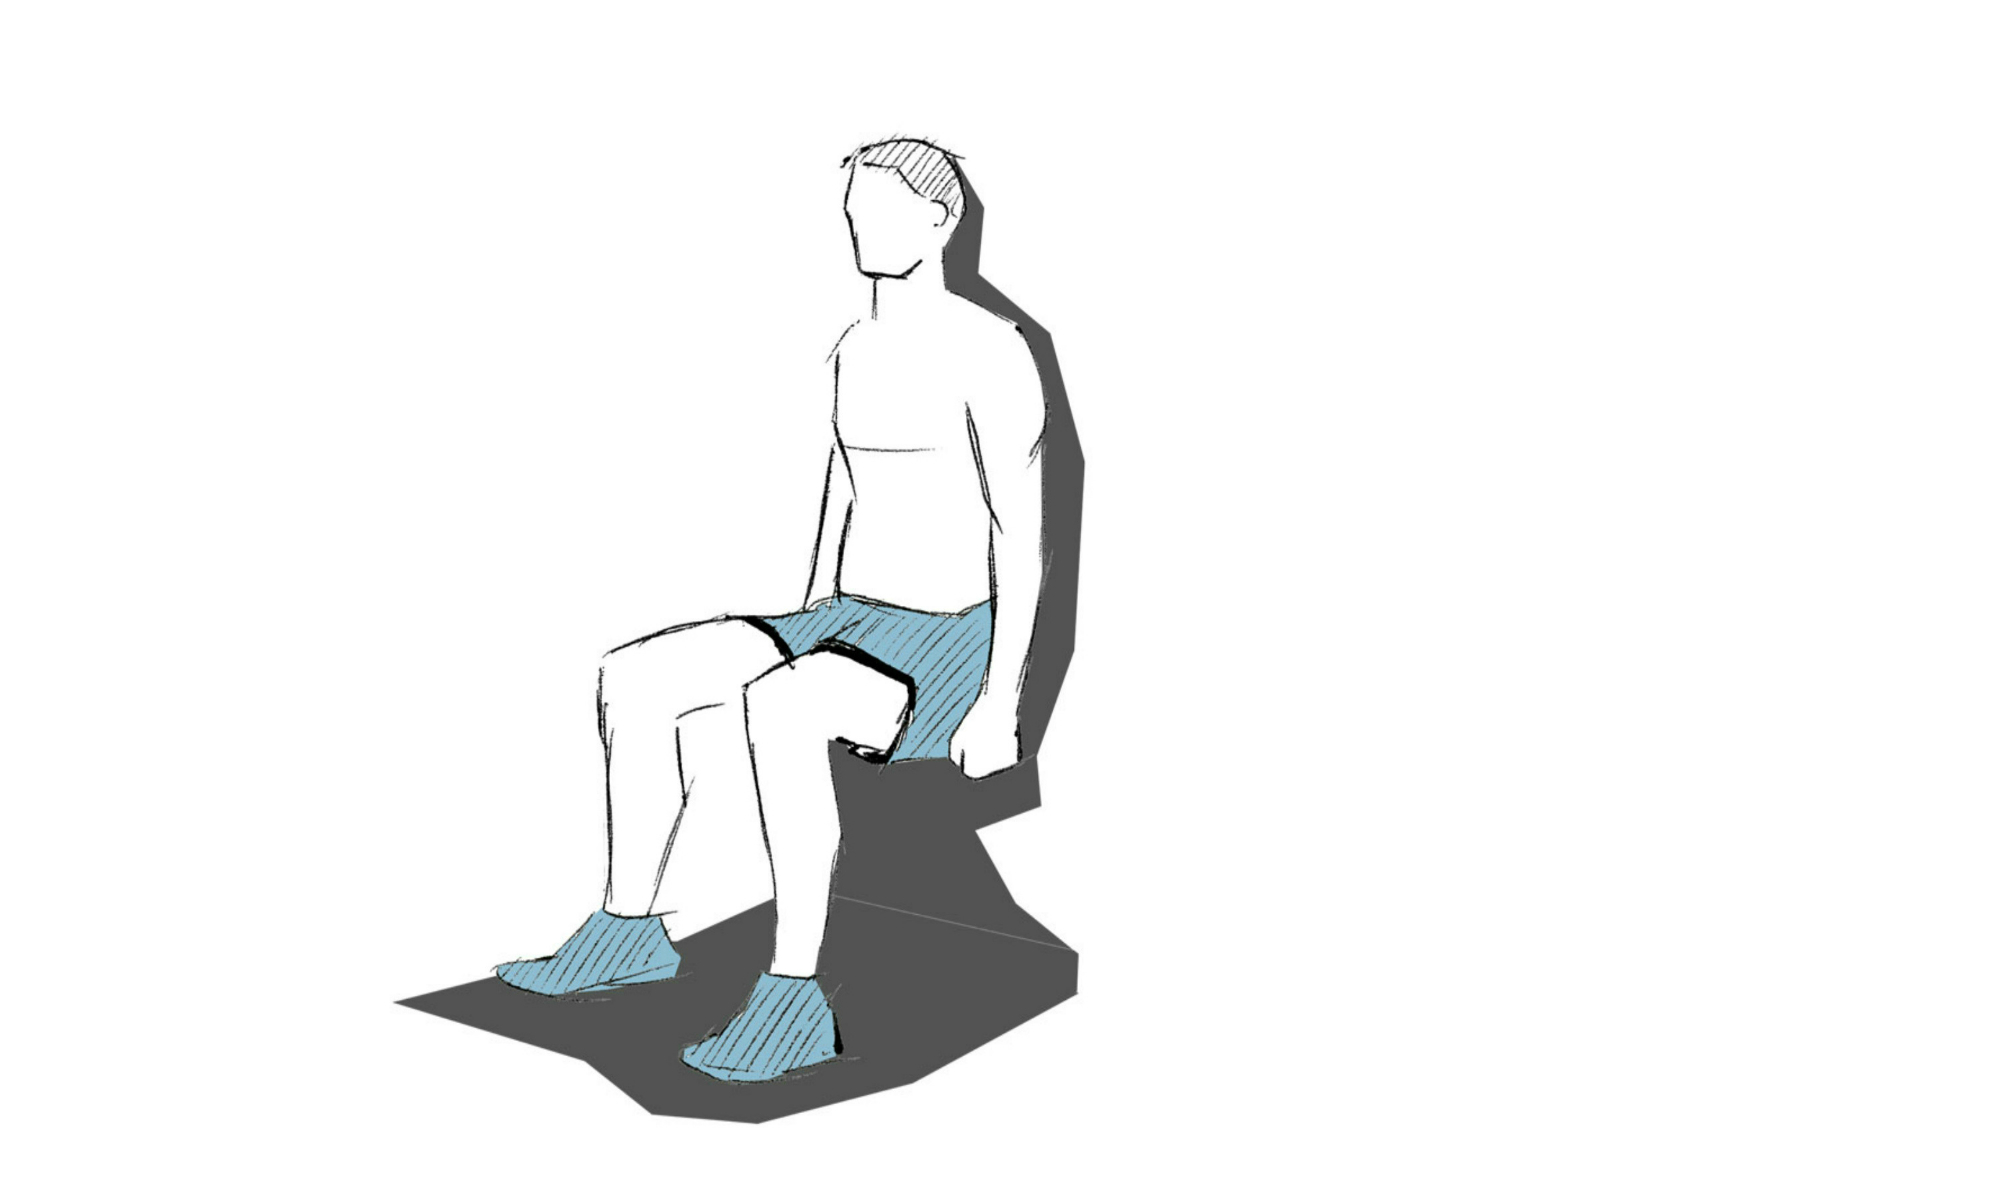 The wall squat exercise.